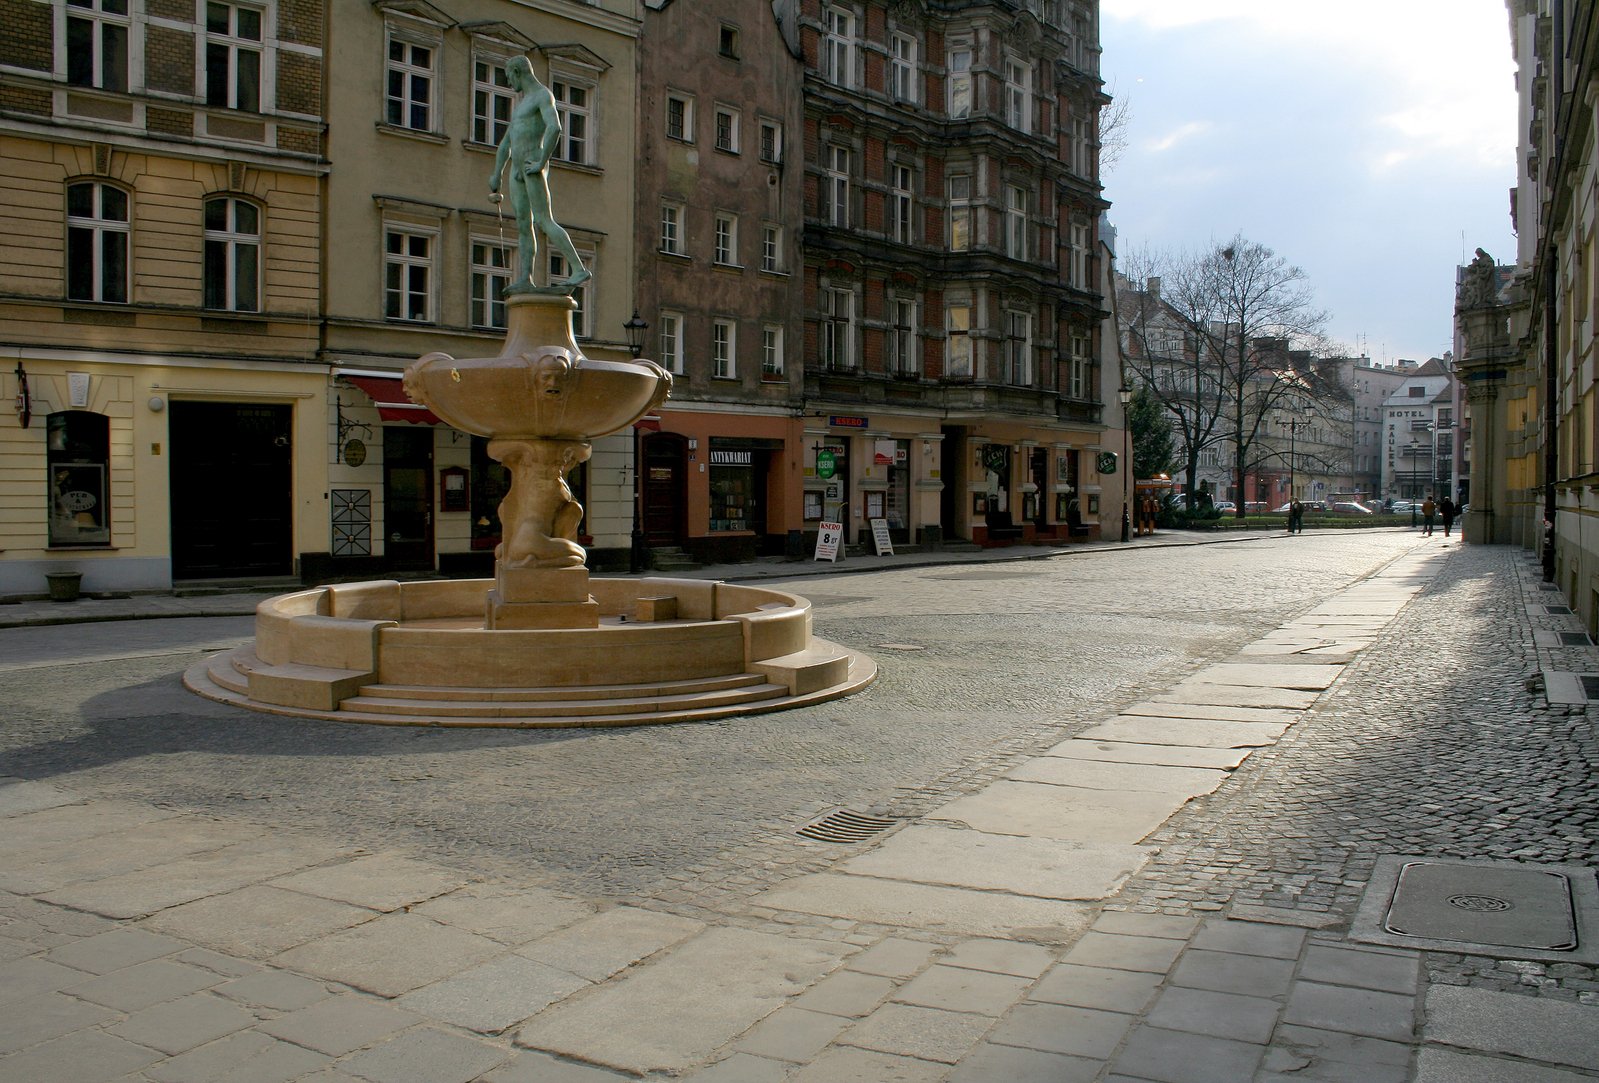 a large square has a fountain in the center